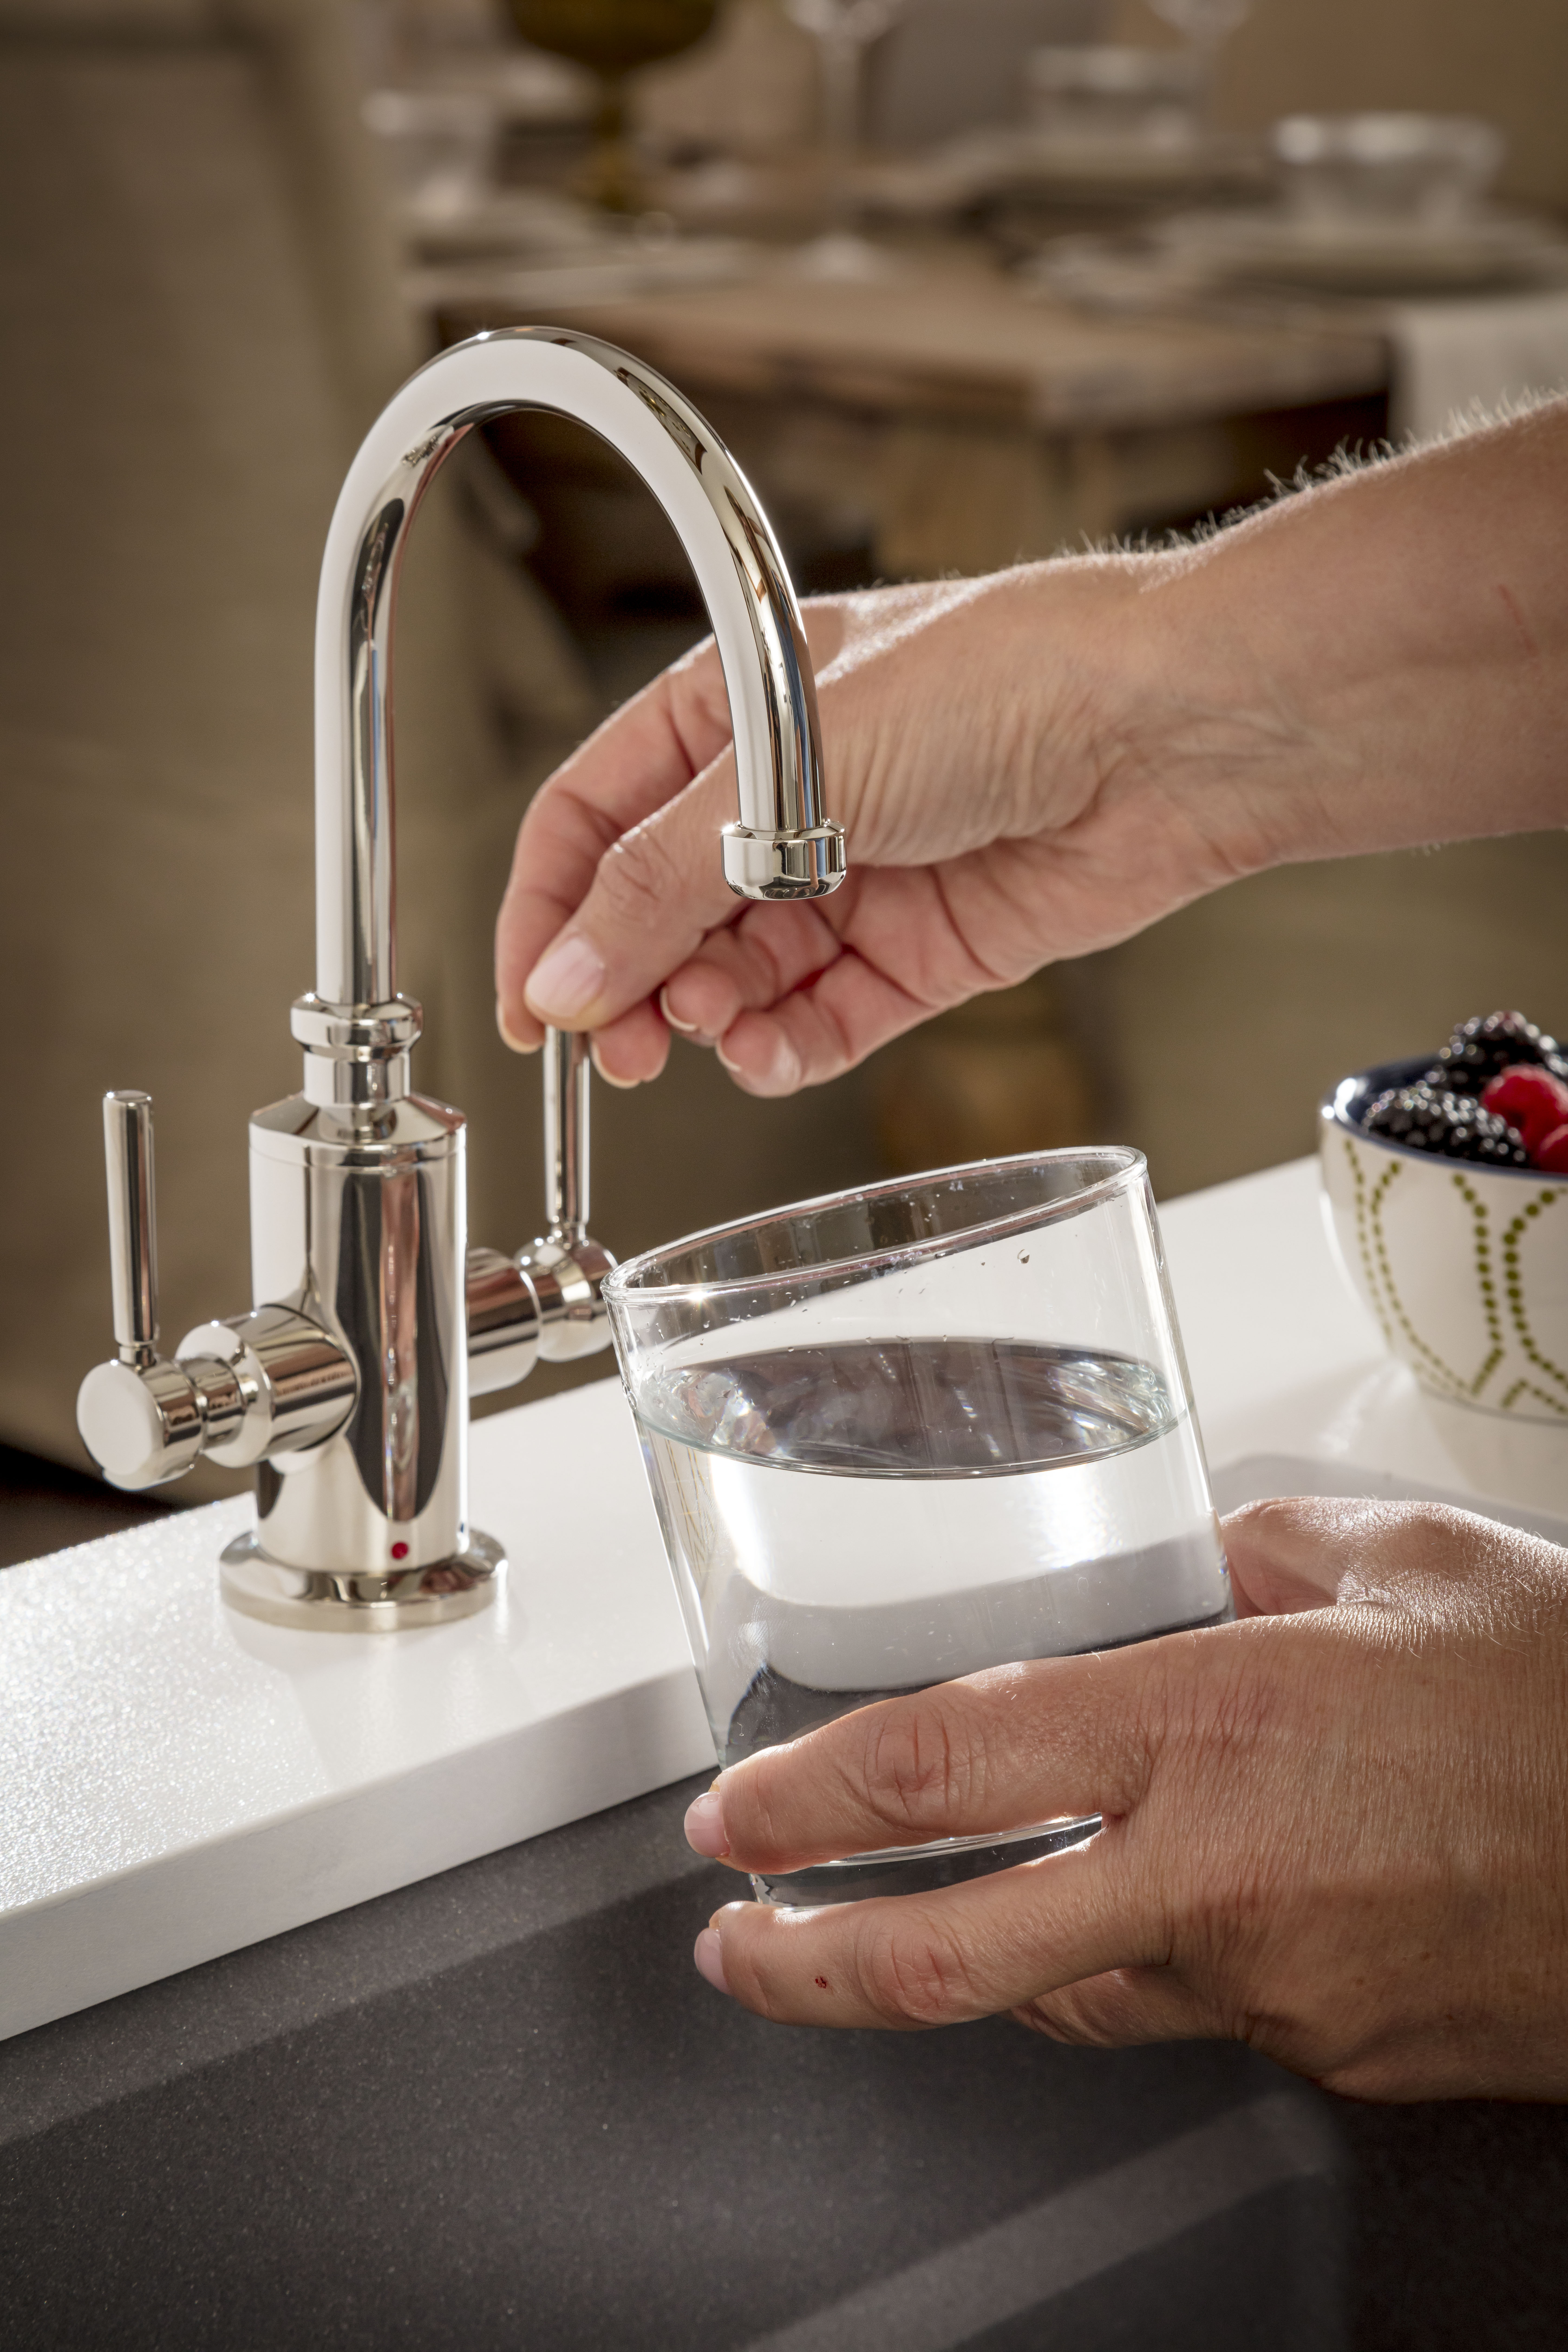 brizo kitchen faucet filling up glass of water